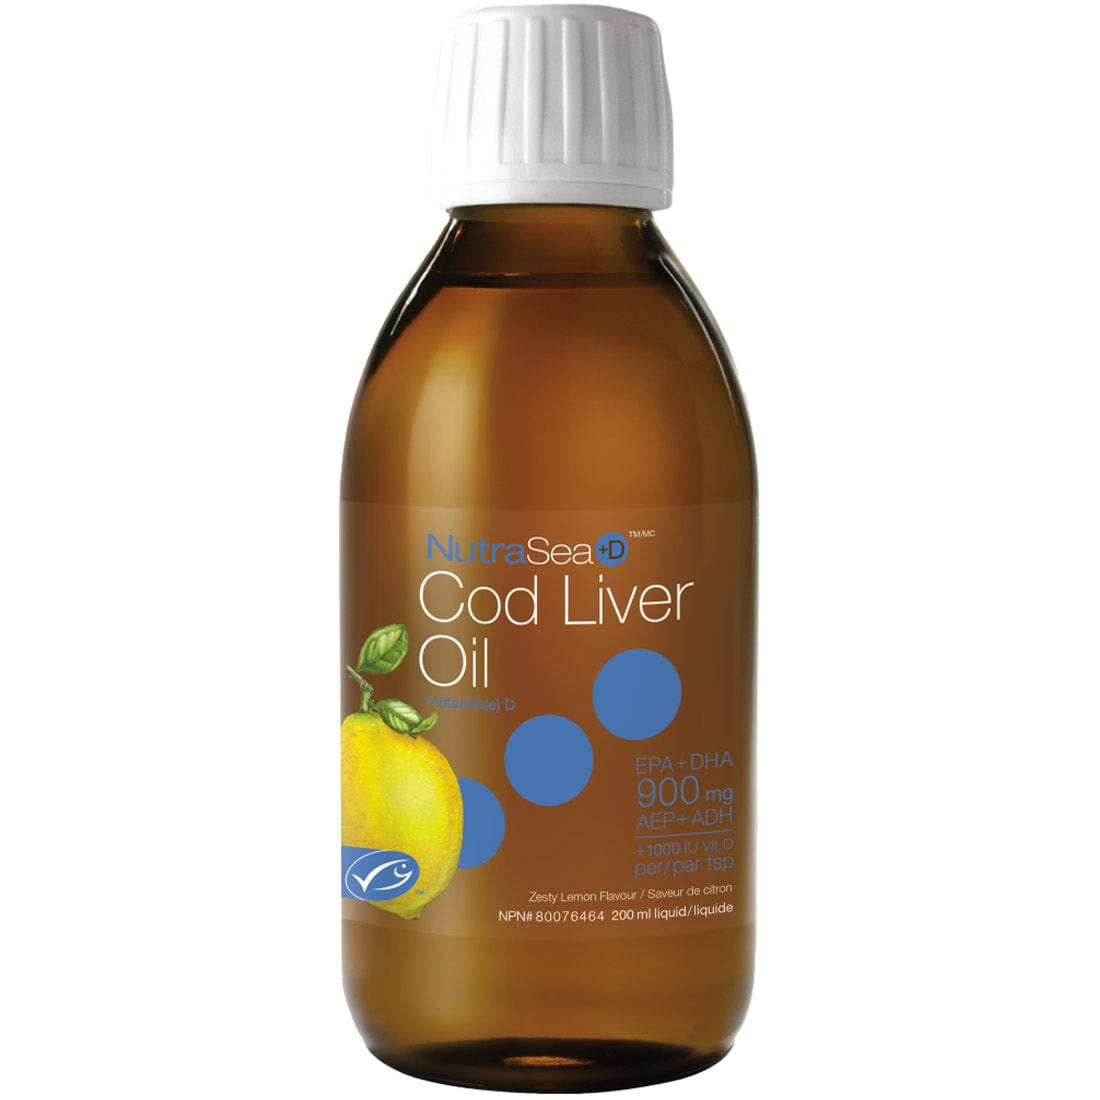 NutraSea+D Cod Liver Oil with Vitamin D, 200ml